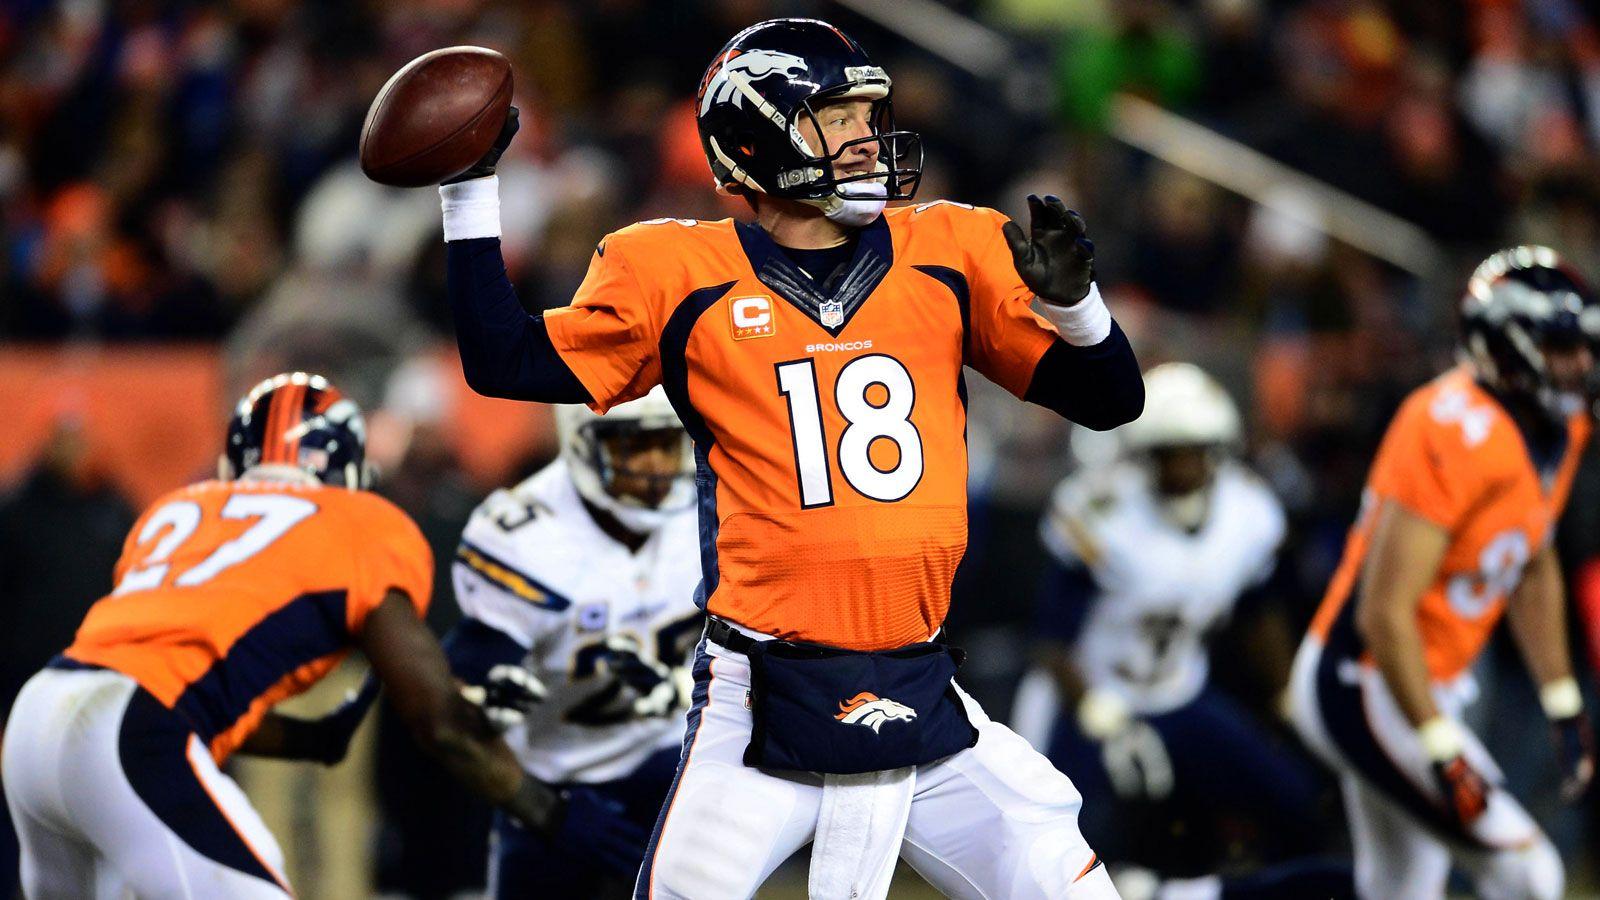 News Station's Epic Fail of Peyton Manning Breaking Touchdown Record